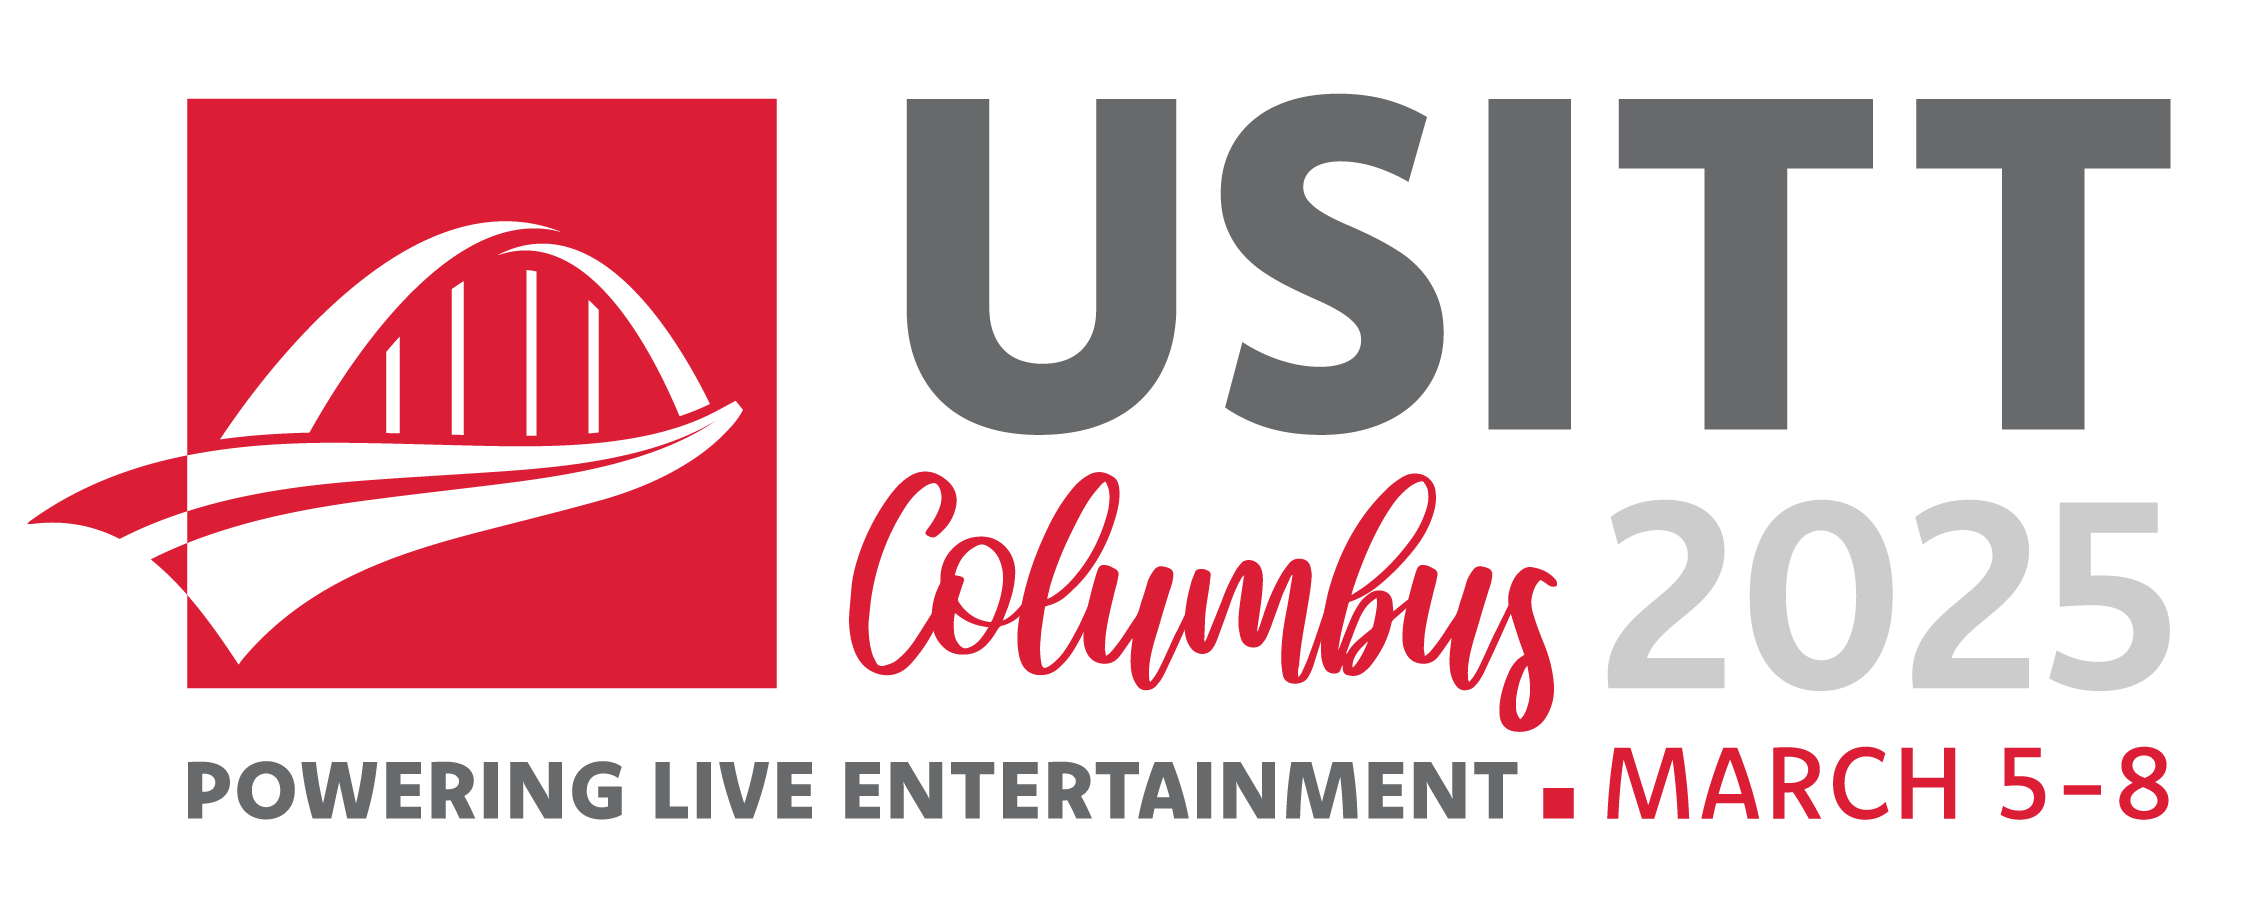 USITT25 Columbus Logo gray and red with tagline